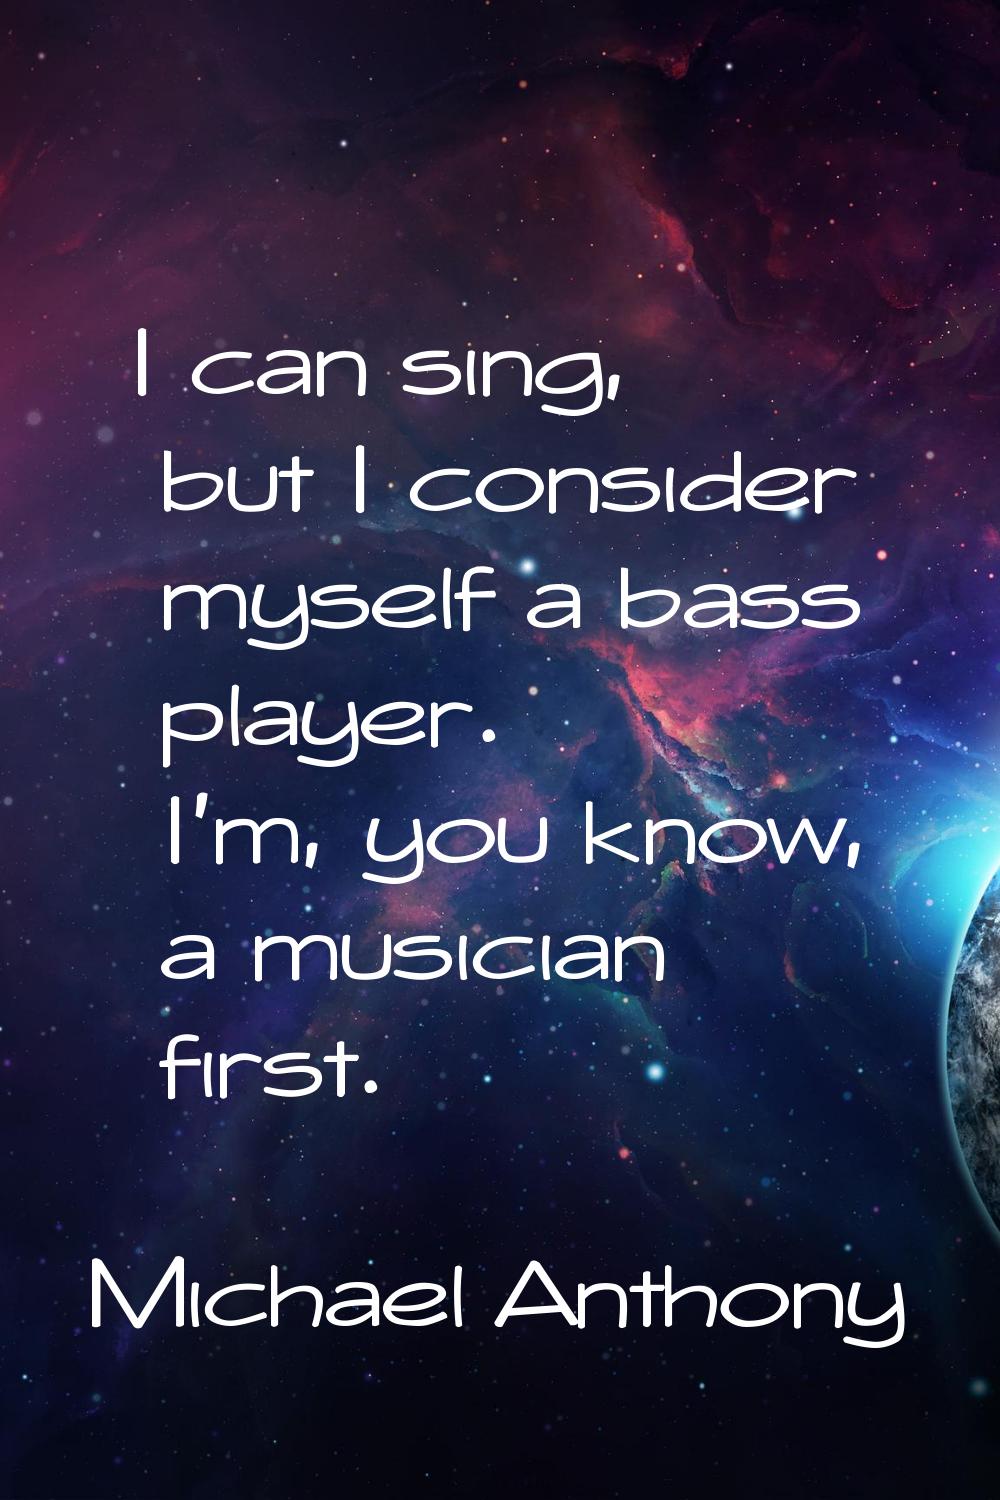 I can sing, but I consider myself a bass player. I'm, you know, a musician first.